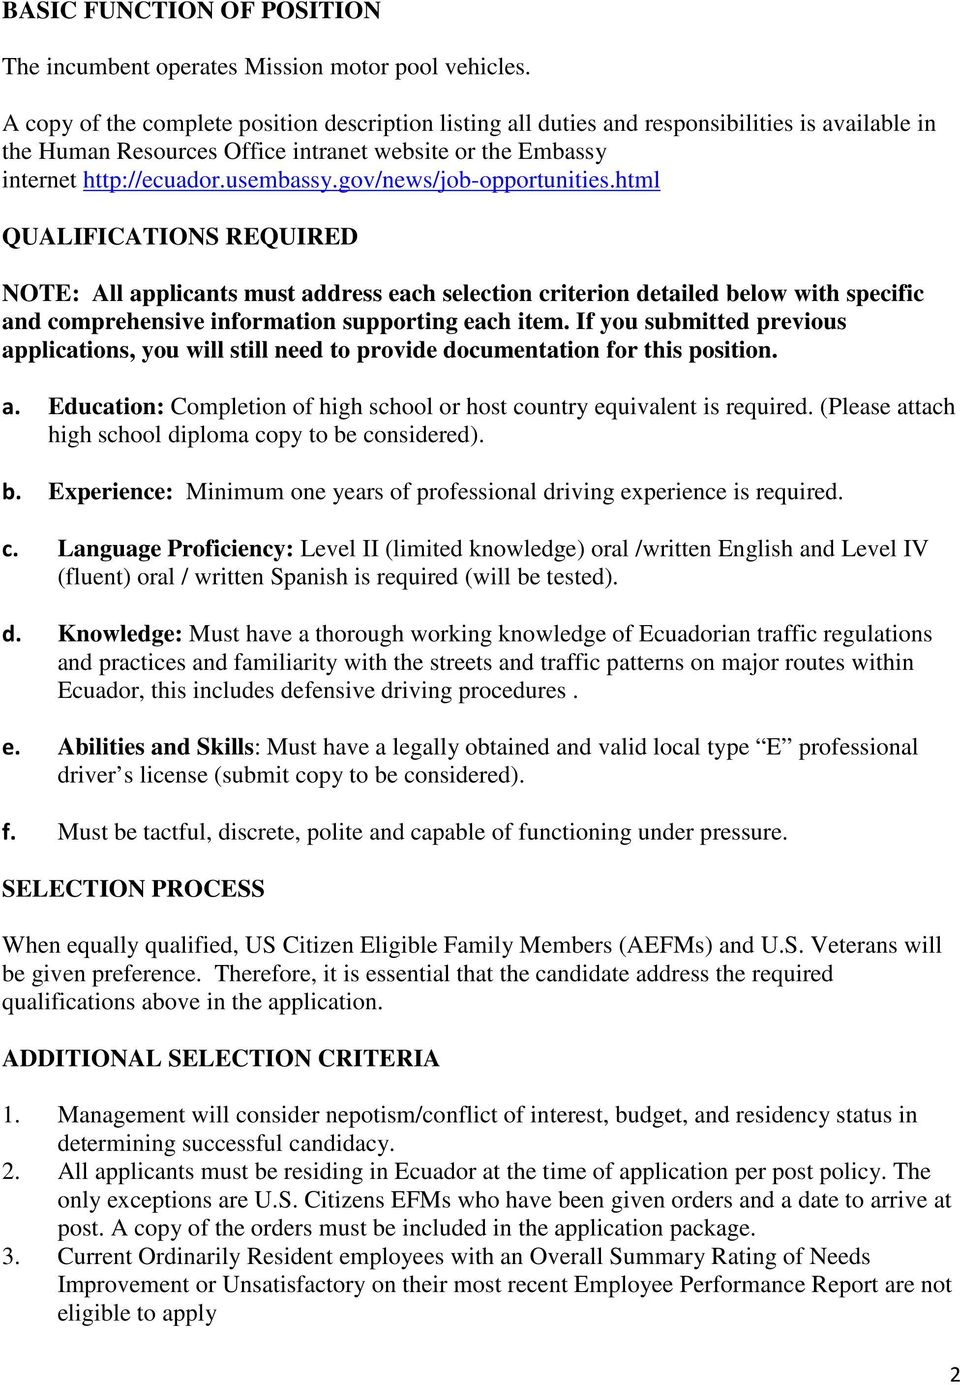 gov/news/job-opportunities.html QUALIFICATIONS REQUIRED NOTE: All applicants must address each selection criterion detailed below with specific and comprehensive information supporting each item.